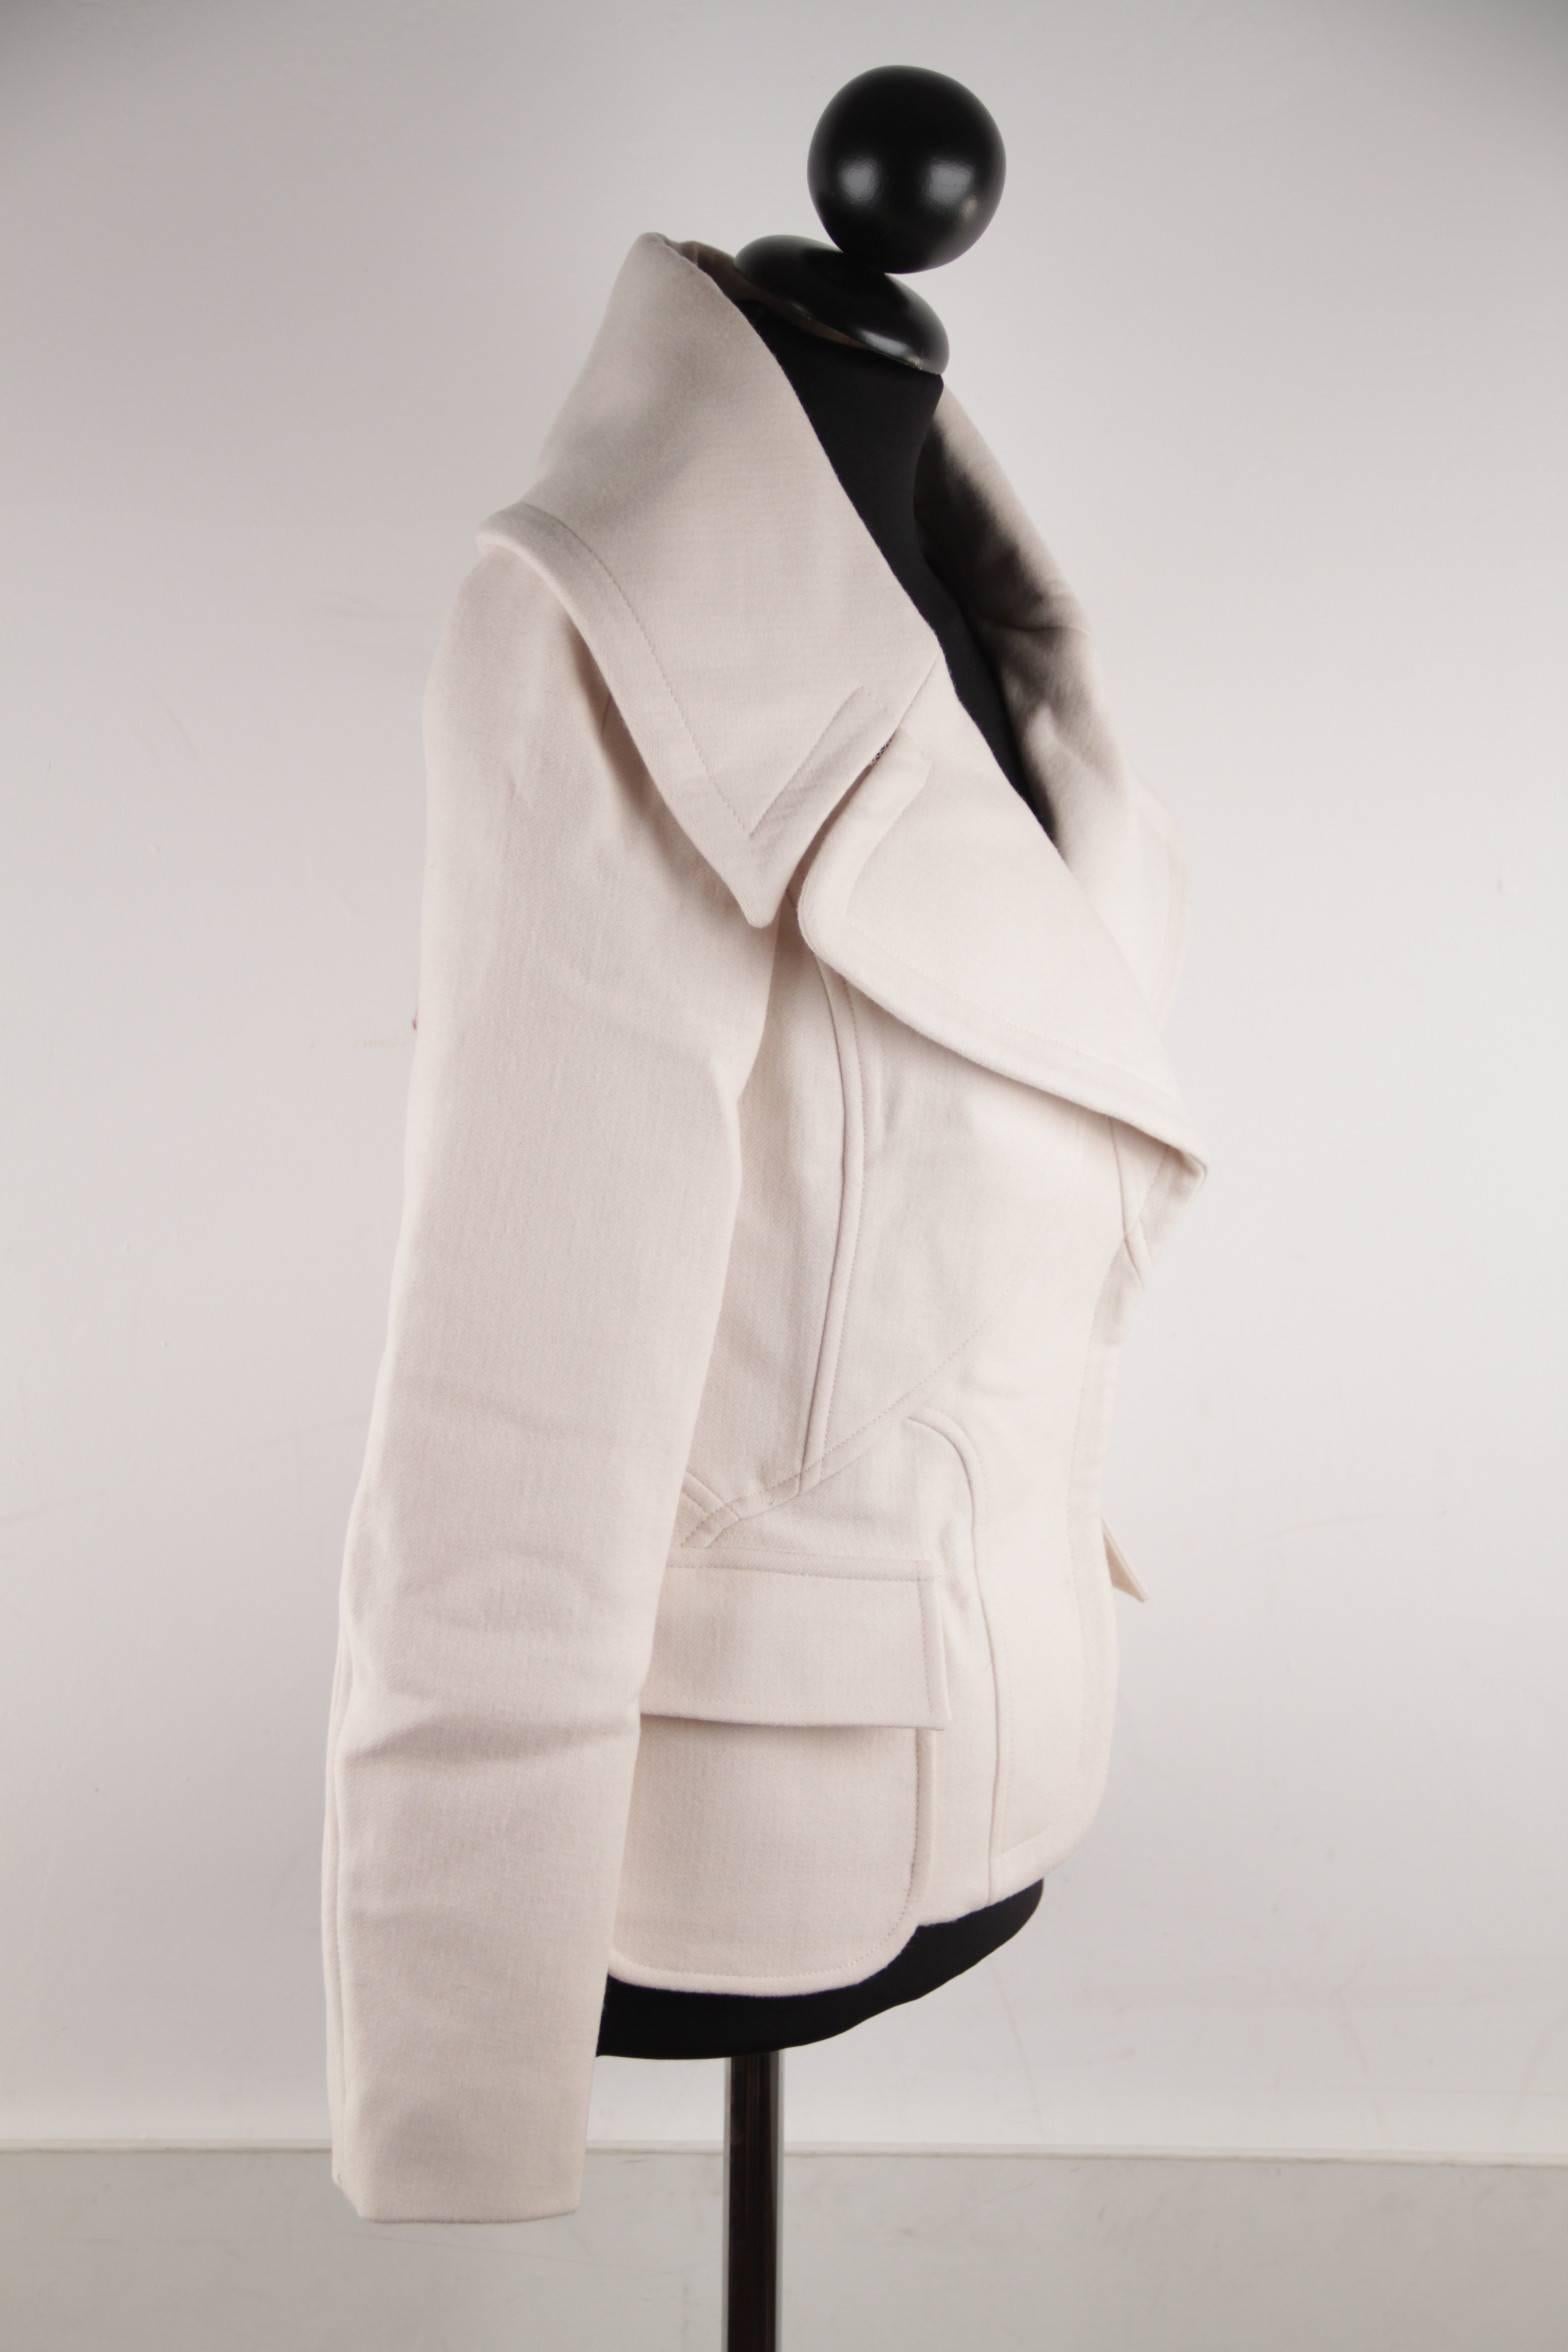 VERSACE Italian Ivory Wool Blend PEACOAT JACKET 2005 Fall Collection Sz 38 IT In Good Condition In Rome, Rome